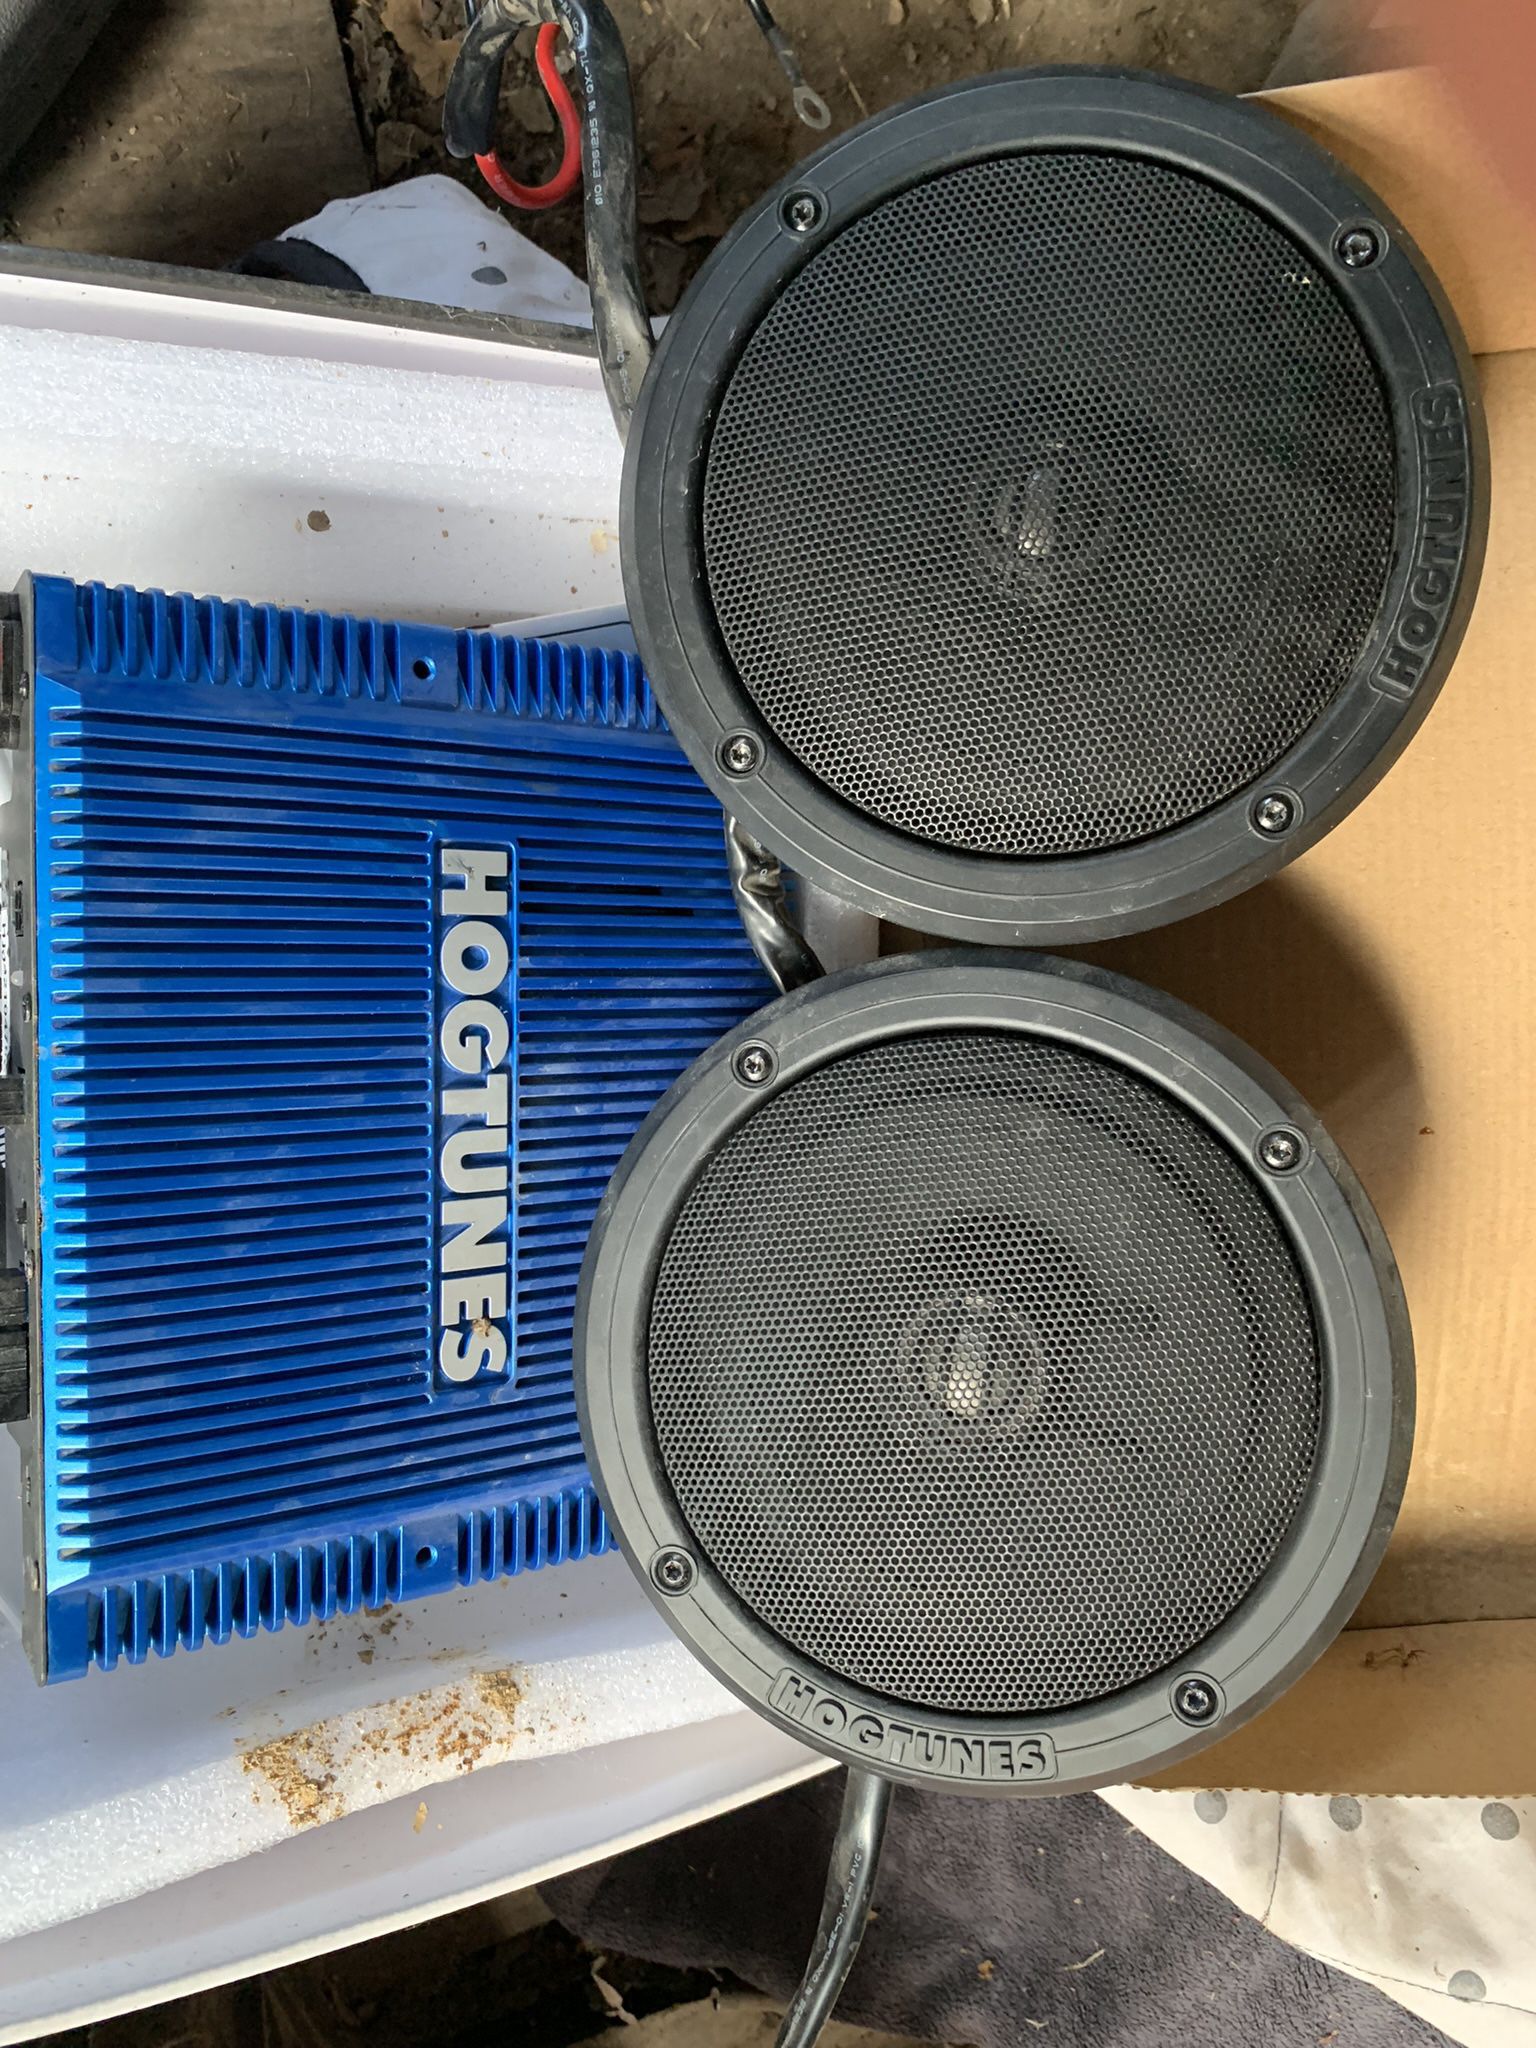 Hogtunes Amp And Speakers